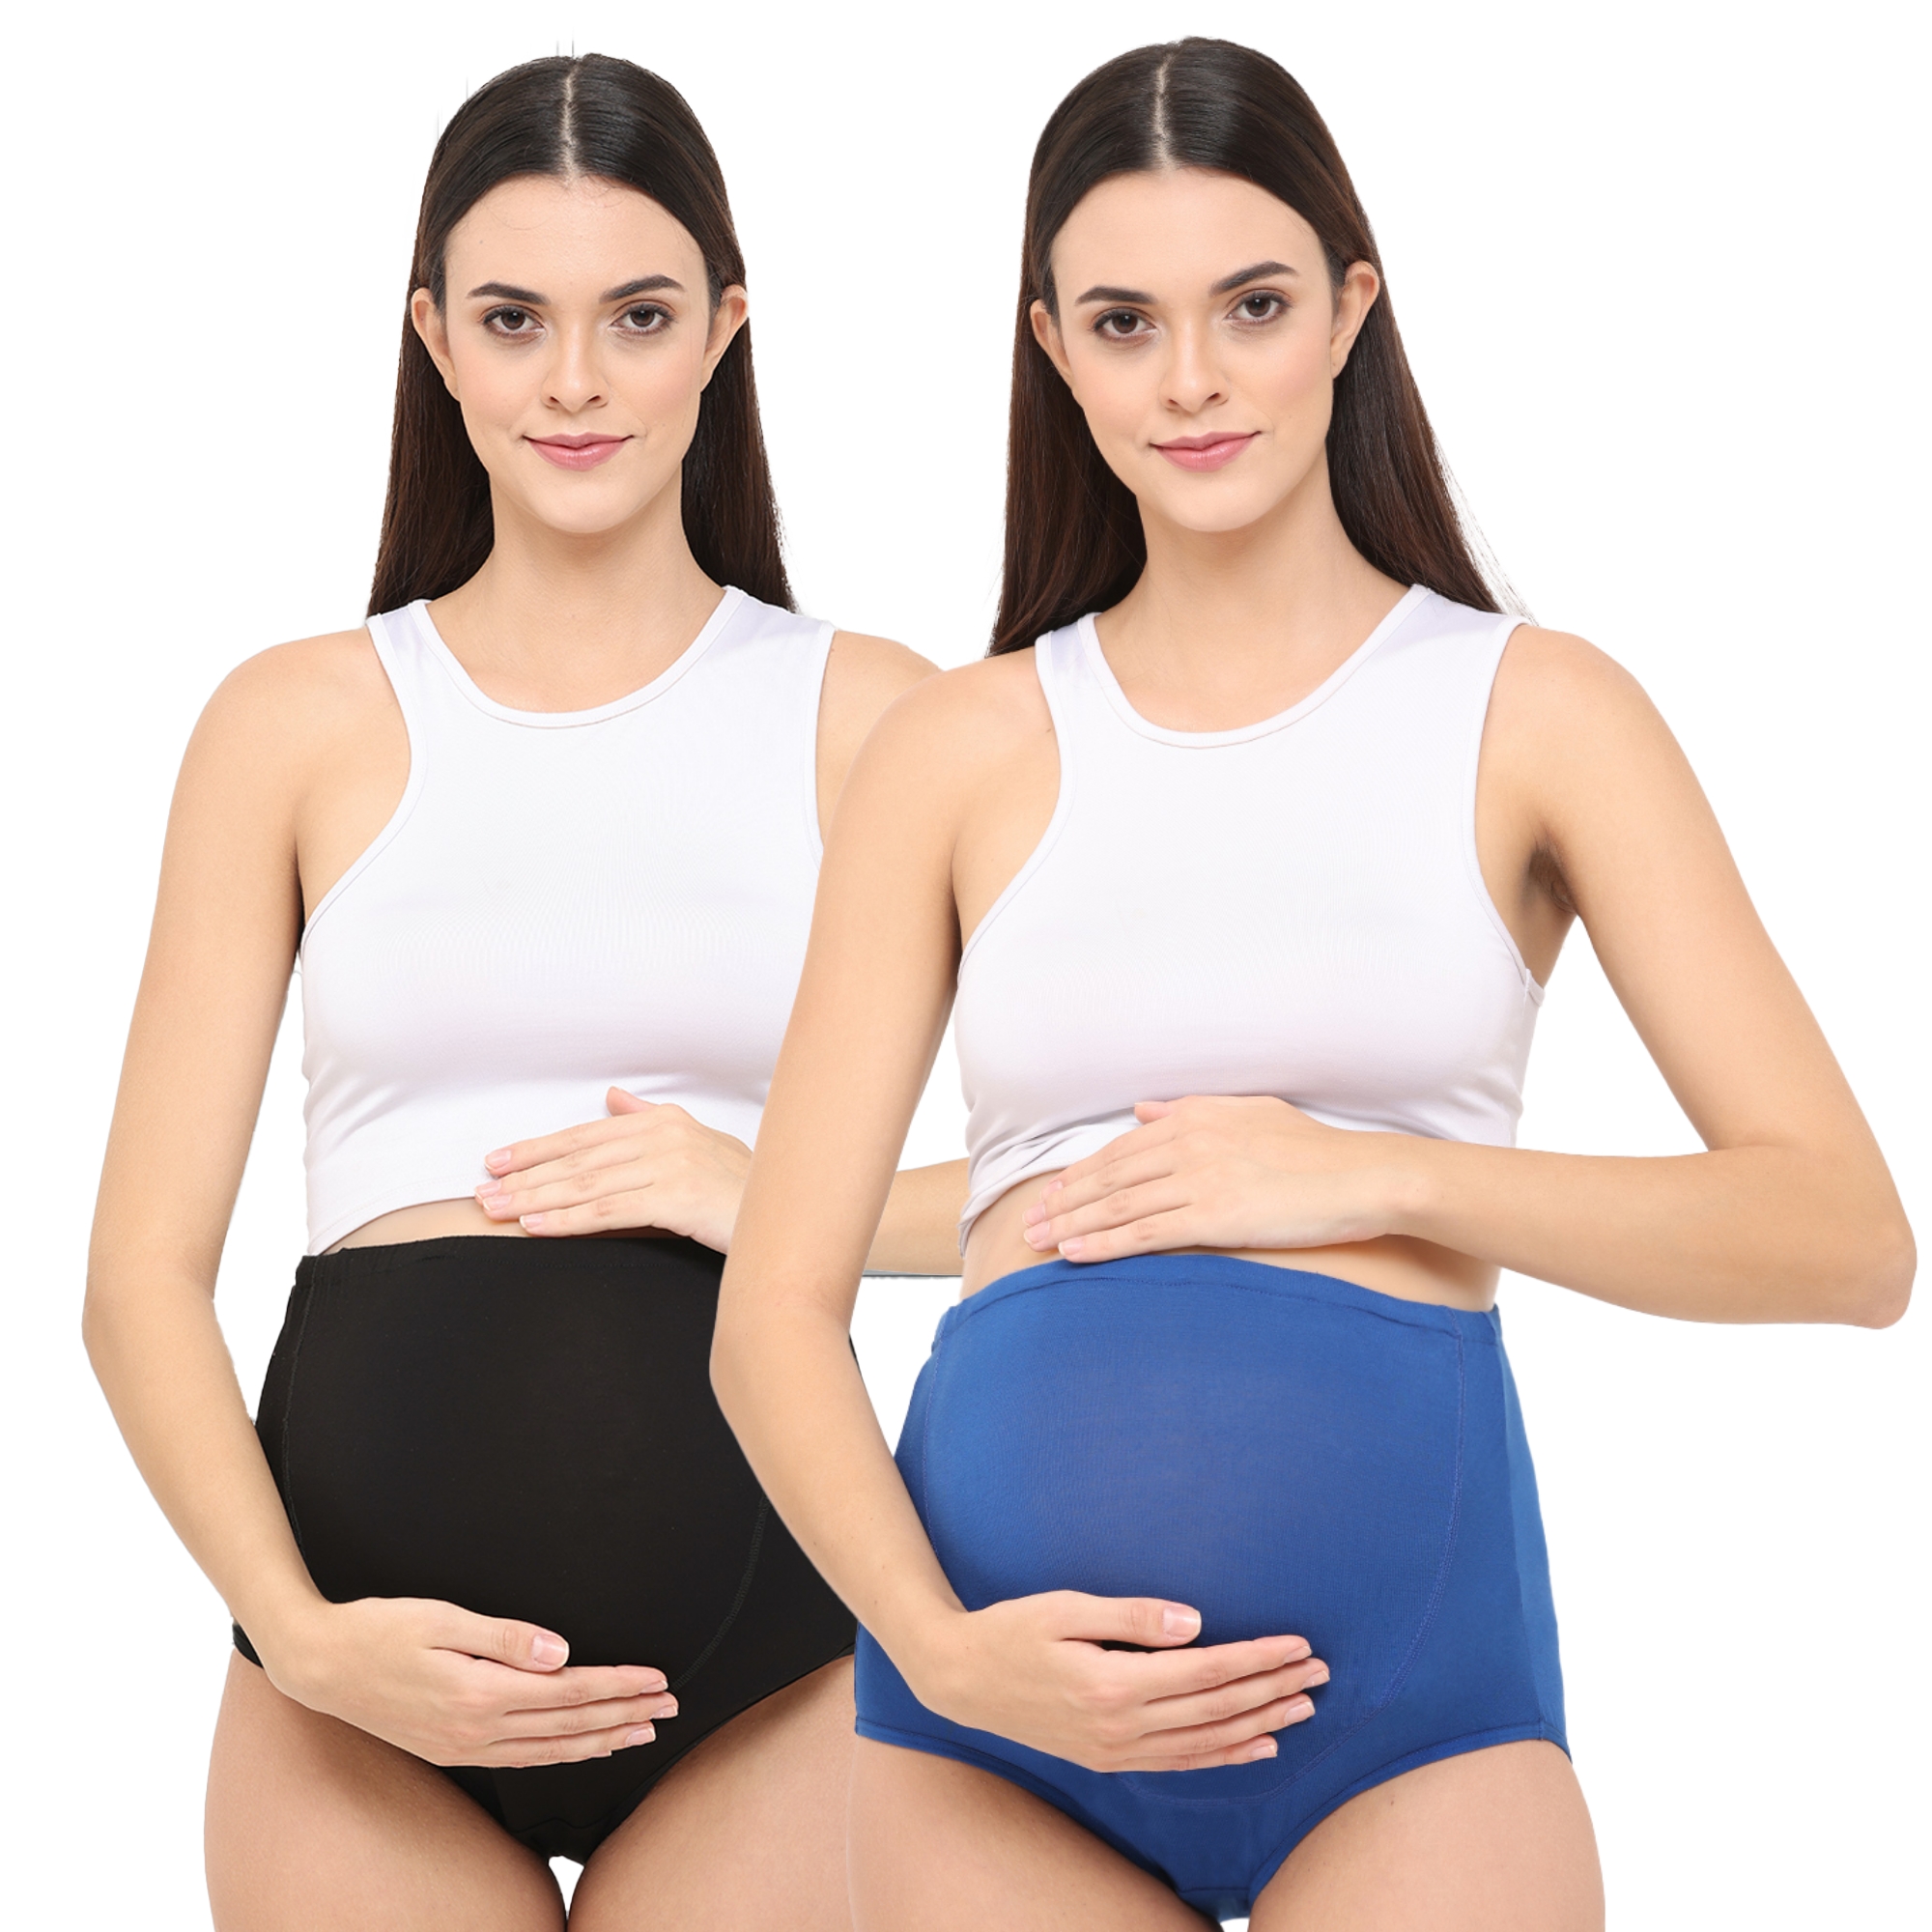 How to Choose the Right Maternity Panty for Pregnancy & Breastfeeding?